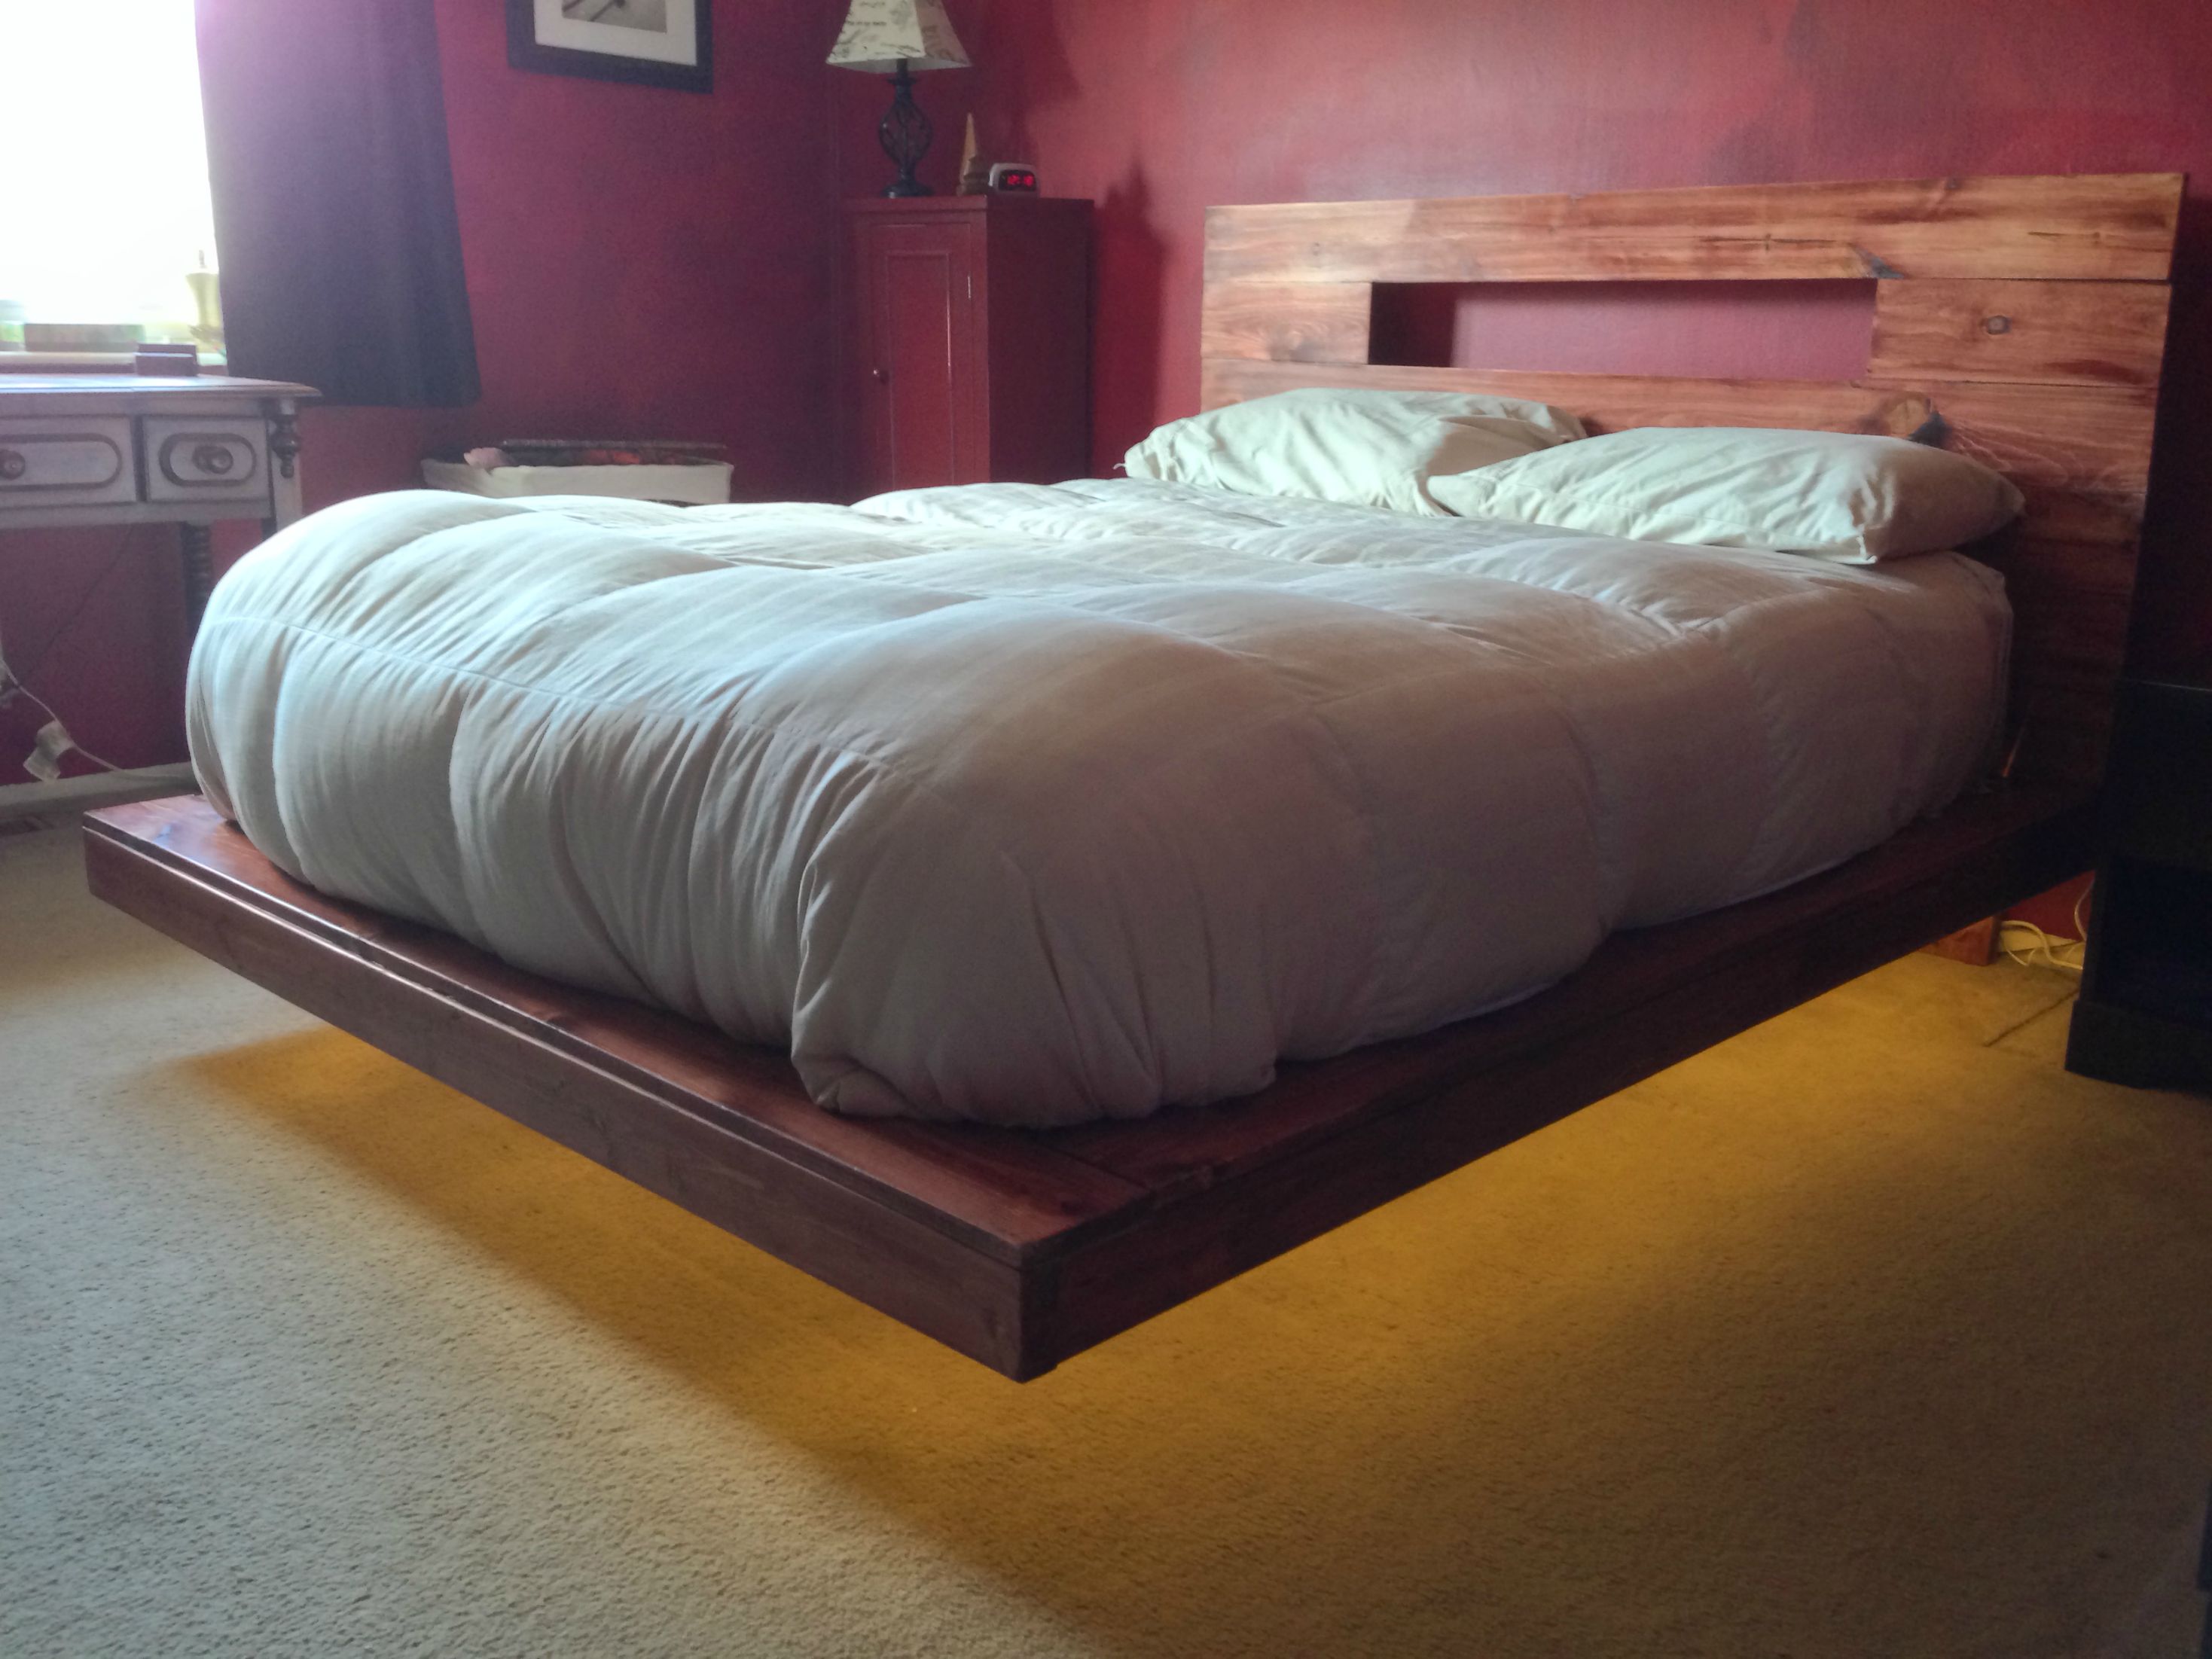 21 Diy Bed Frames To Give Yourself The, Diy Floating King Bed Frame With Led Lighting Plans